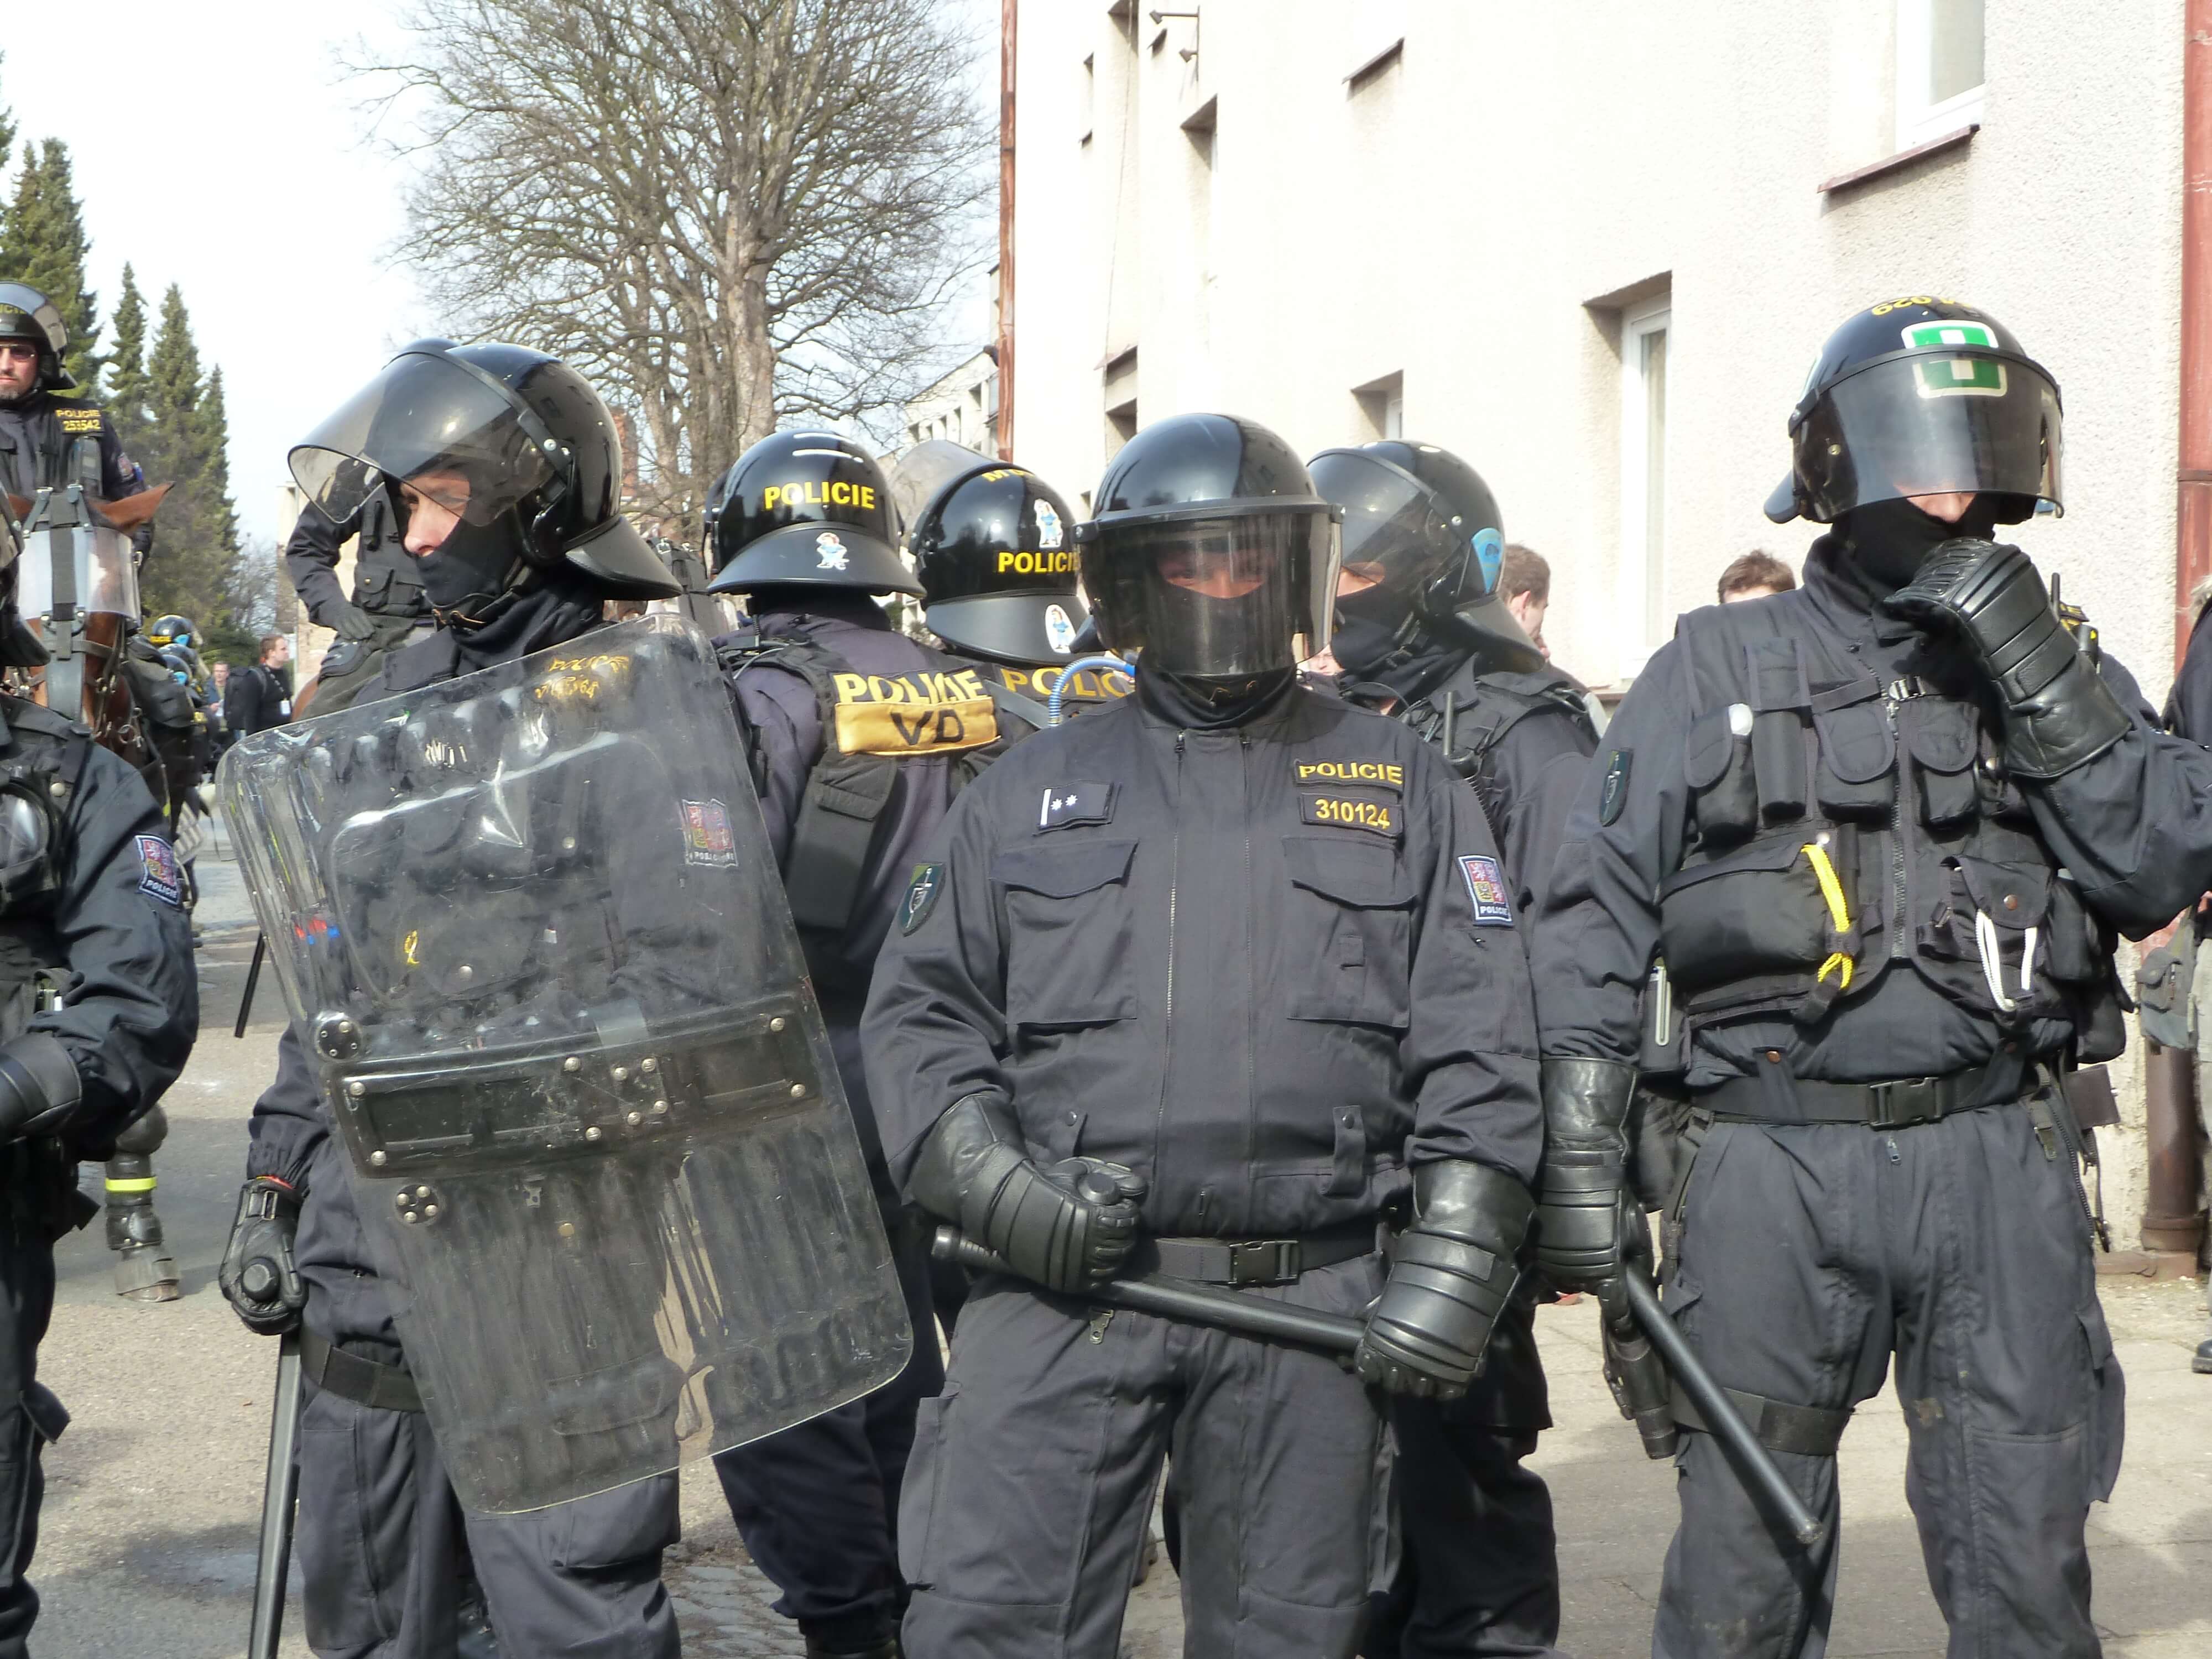 Image of fully equipped policemen